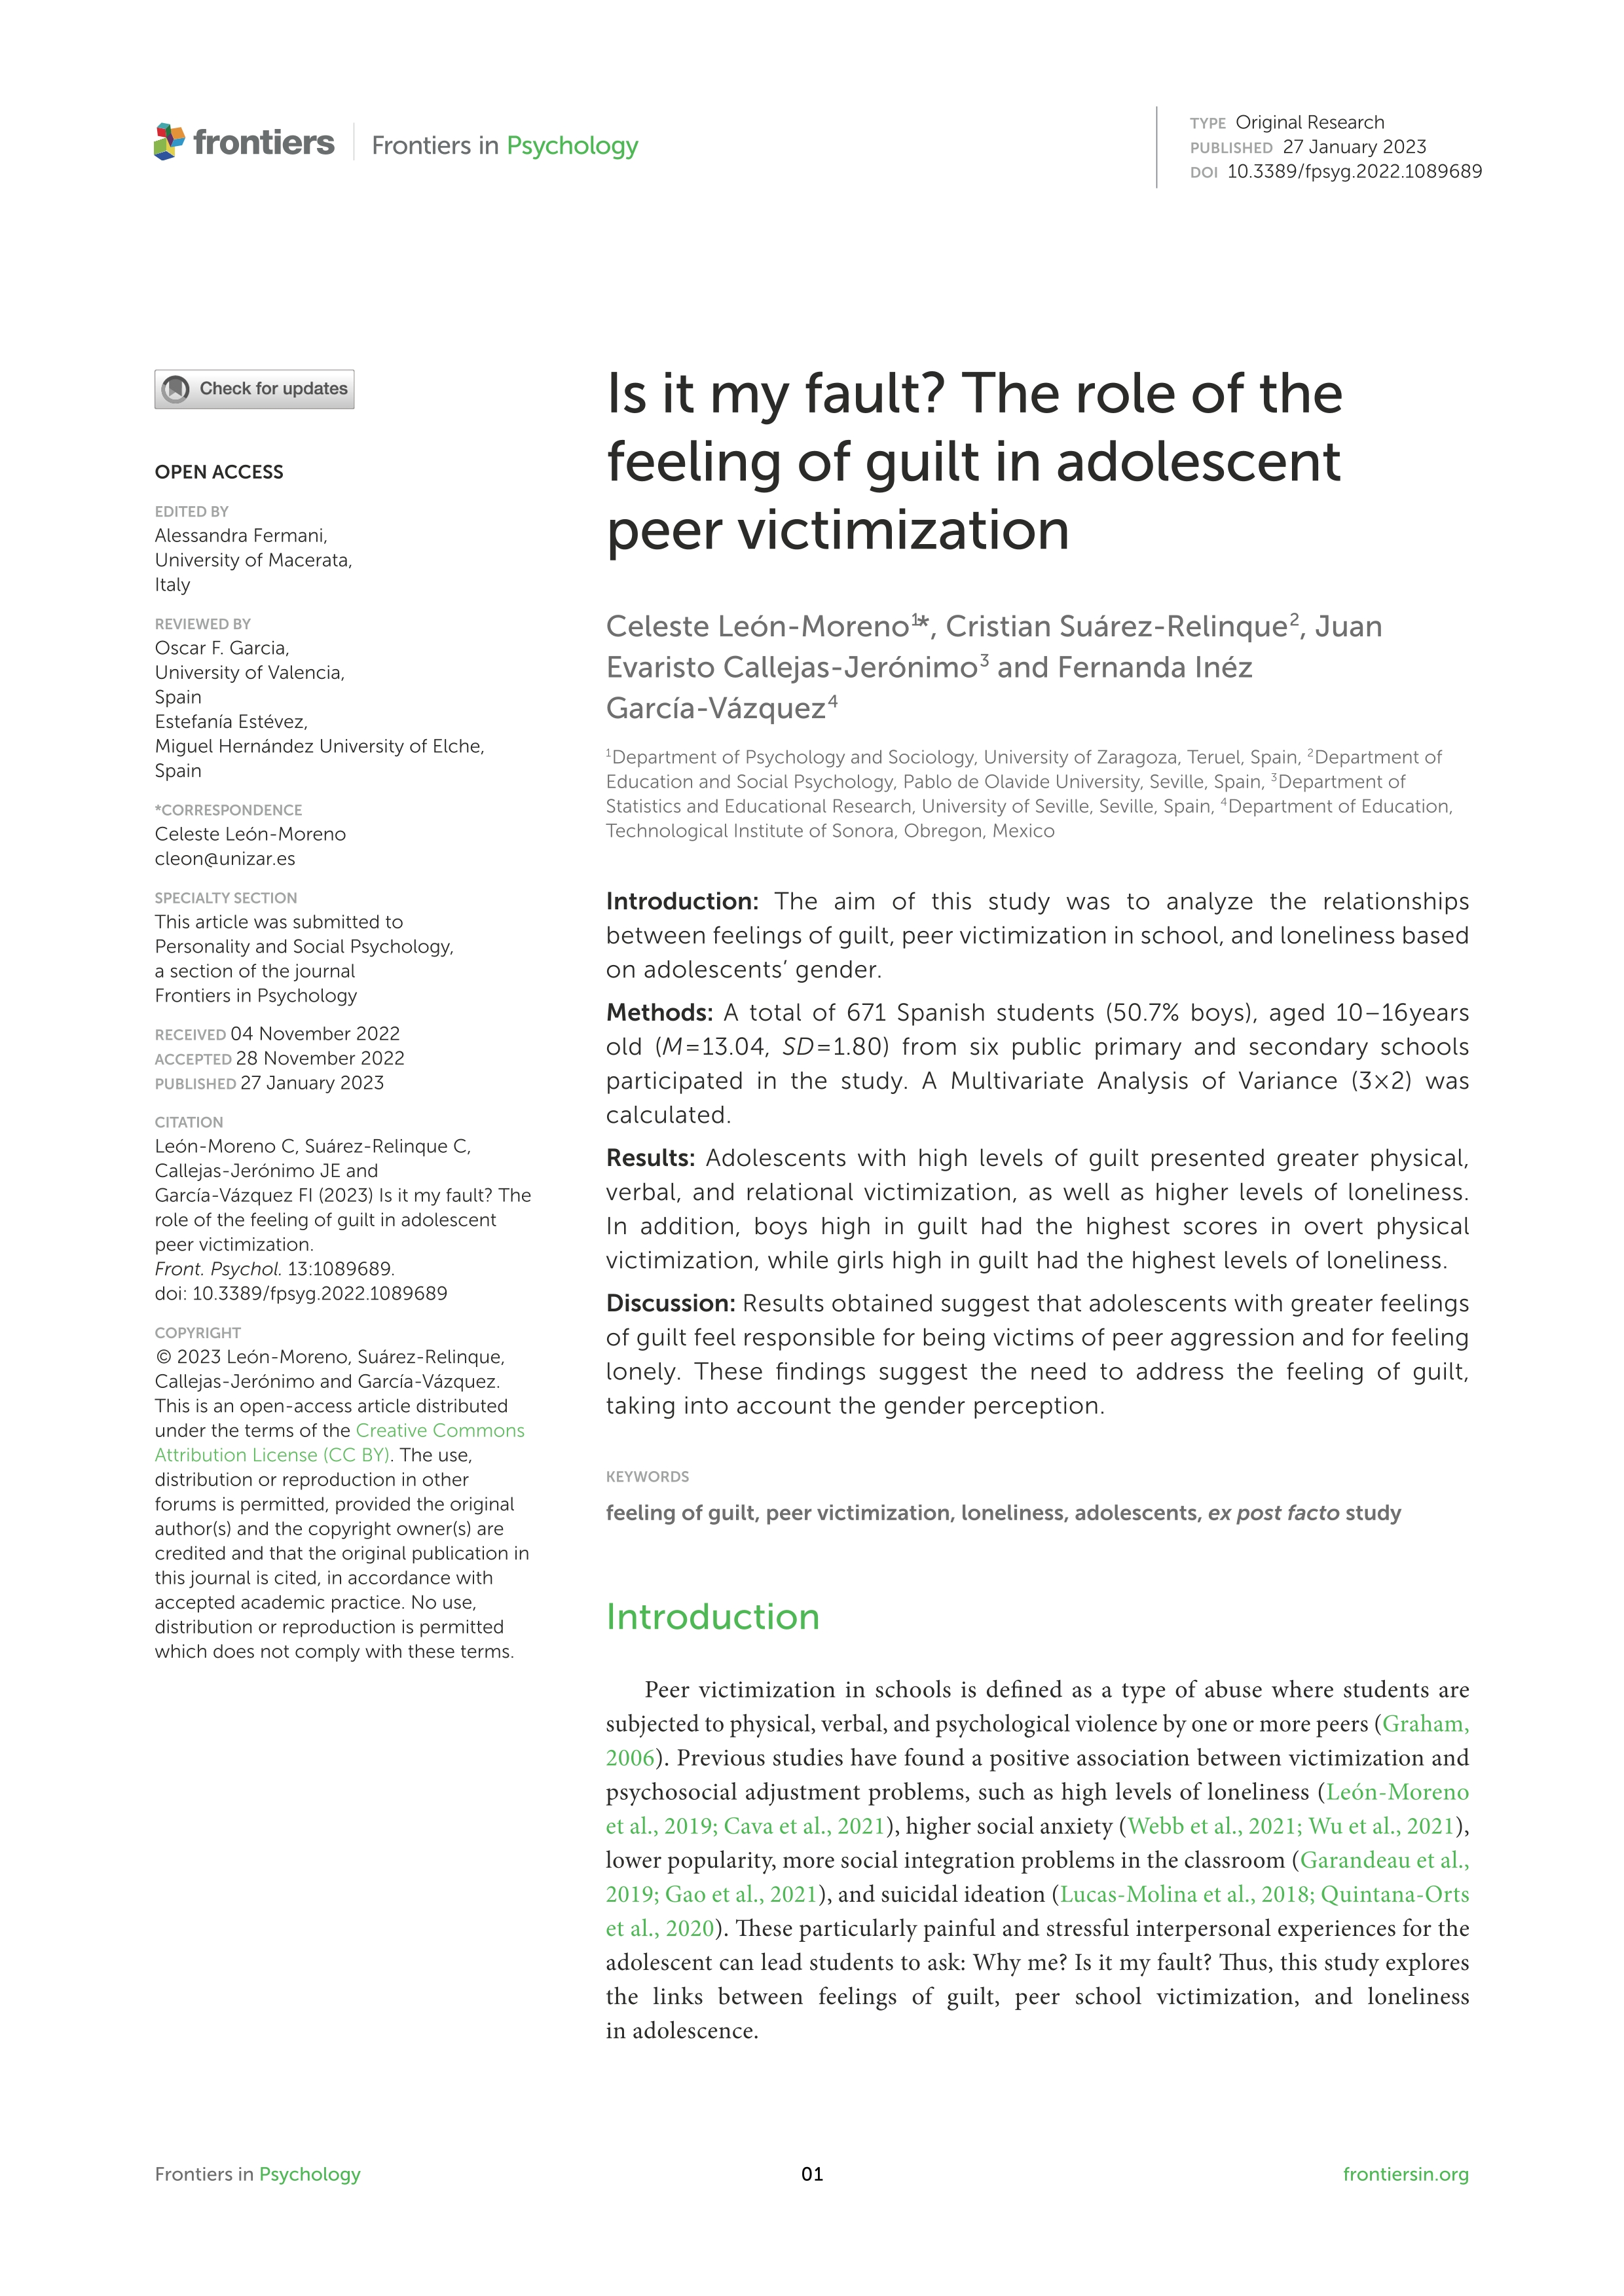 Is it my fault? The role of the feeling of guilt in adolescent peer victimization